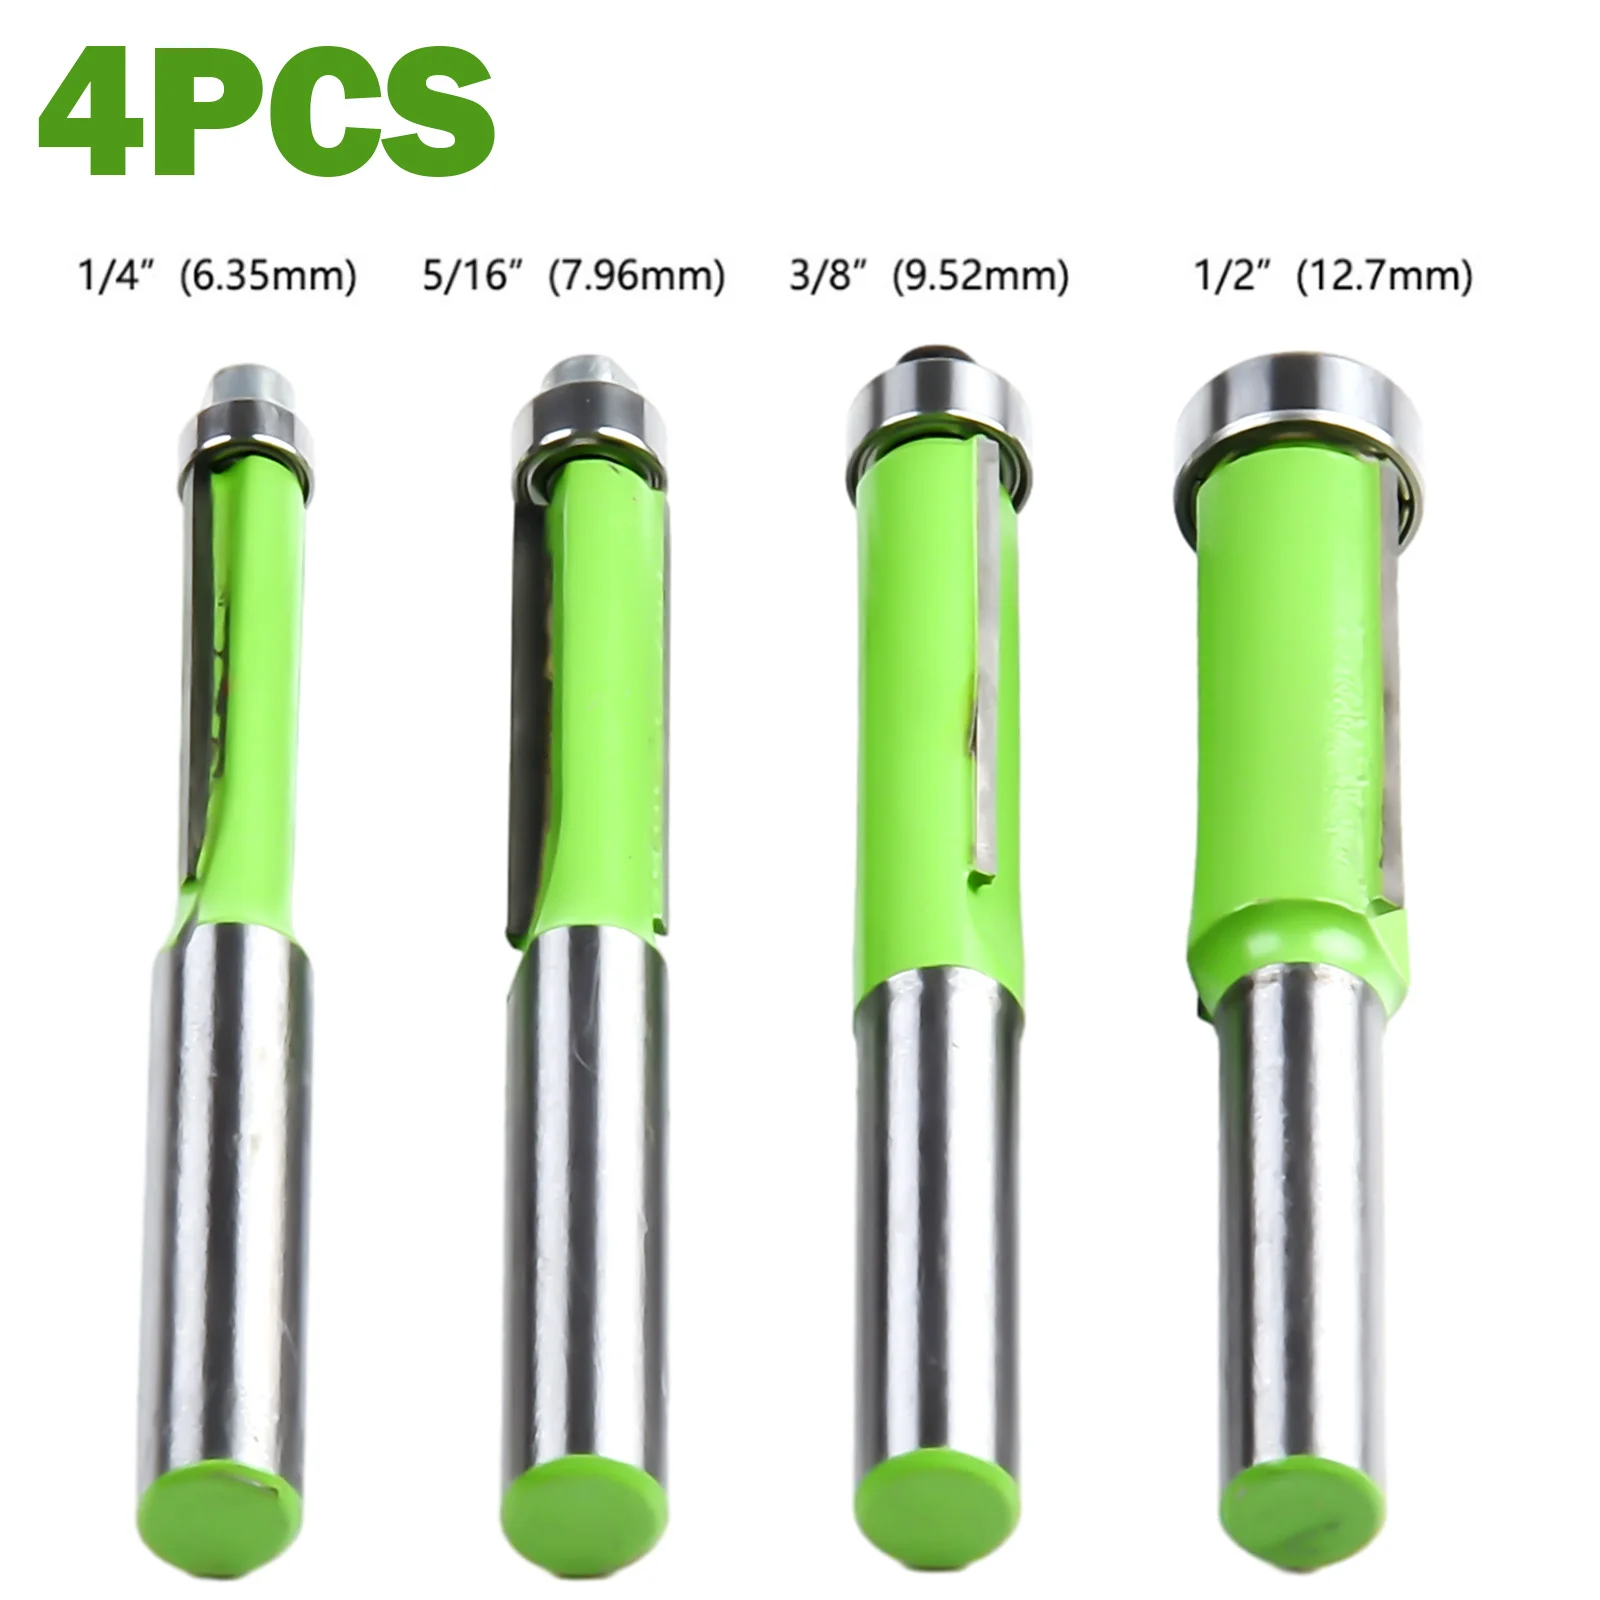 

4pcs 8mm Shank Straight Bit Tungsten Carbide With Bearing Router Bits Milling Cutter Flush Trim For Wood Woodwork Tool